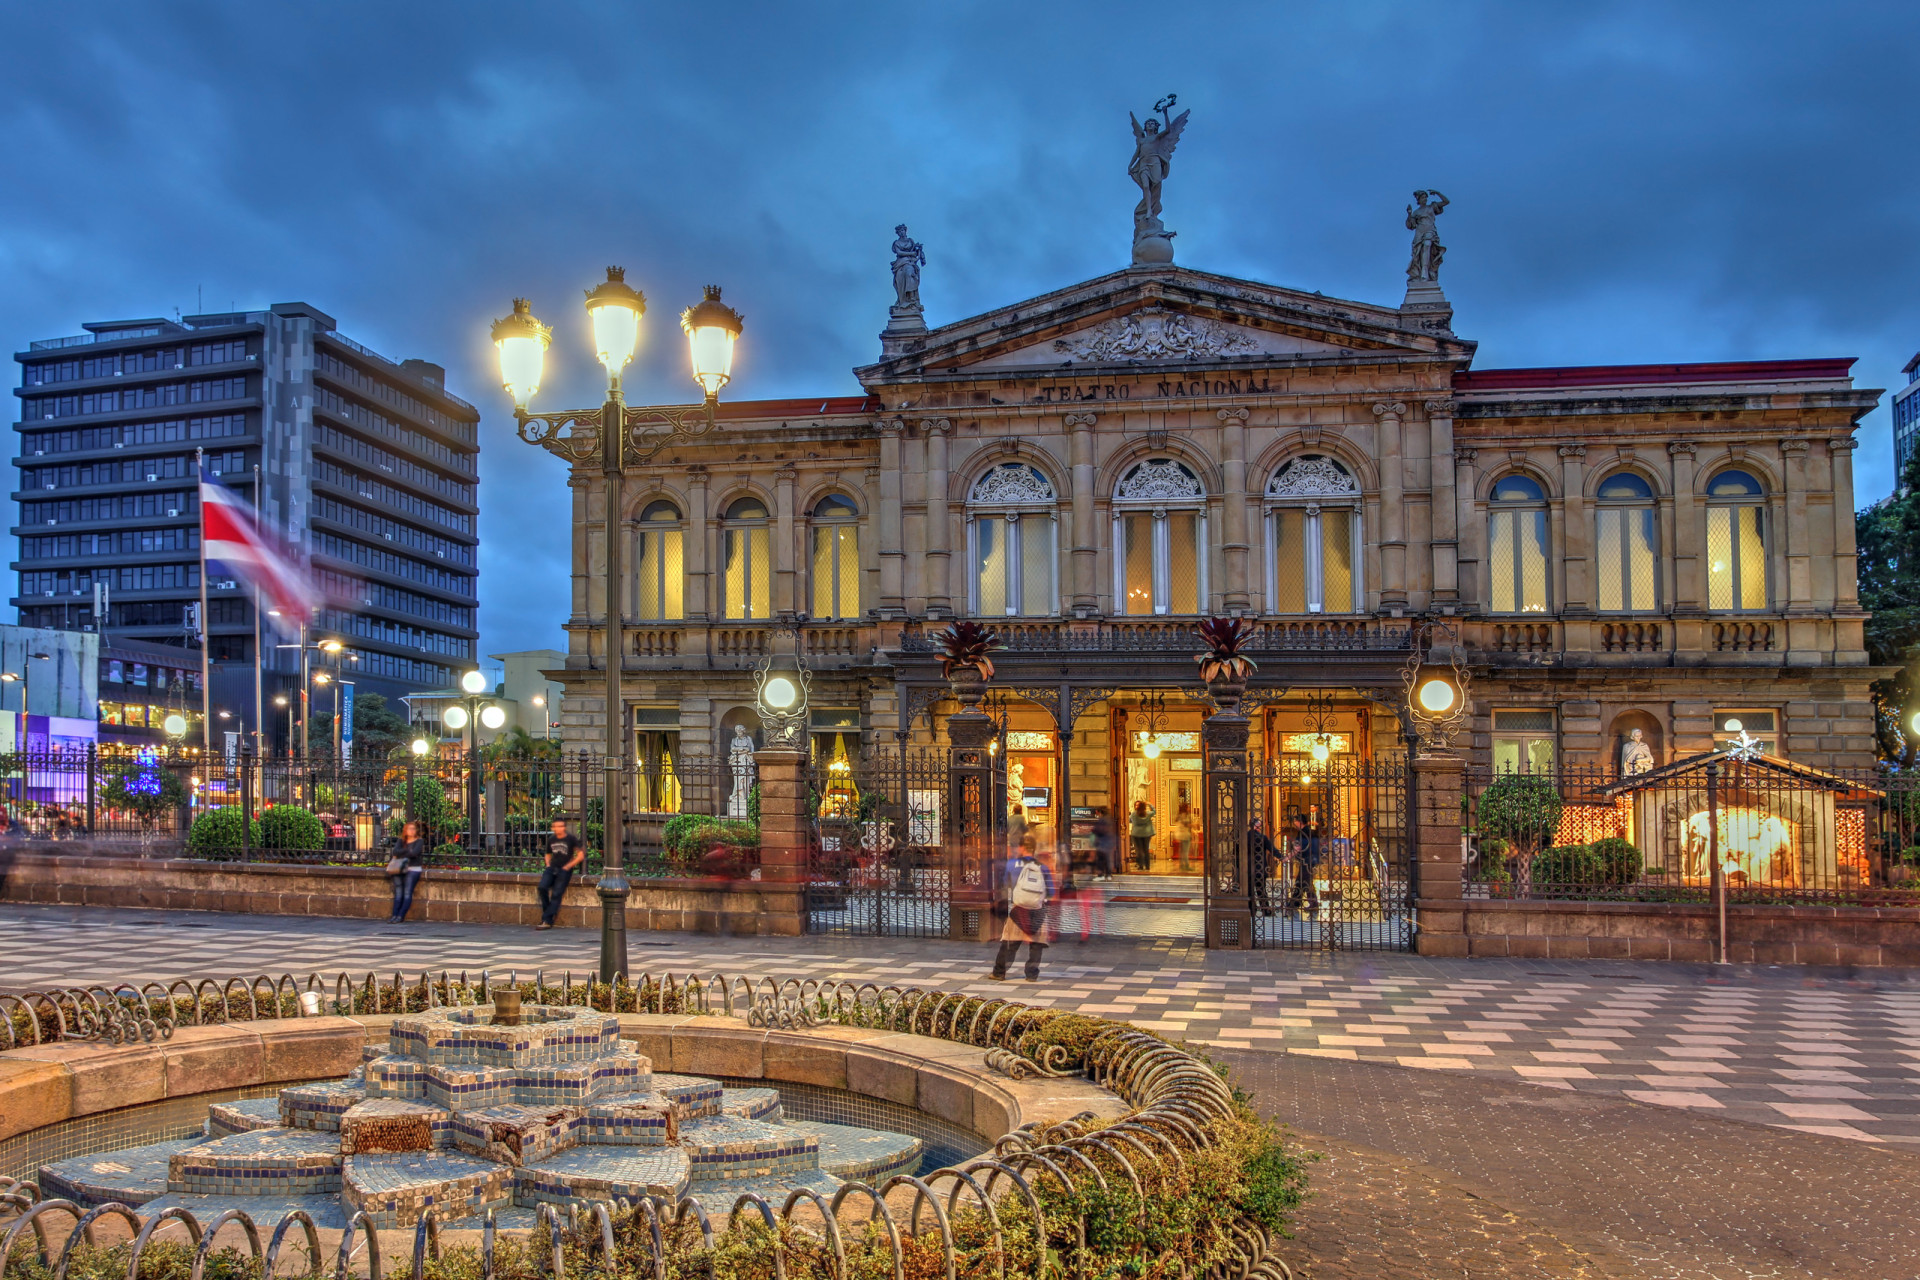 <p>San José was founded in 1739 and became the country's capital in 1823. Among its cultural draws is the splendid National Theater. Opened in 1897, this is the finest historic building in San José, appreciated for its lavish and decorative interior.</p>